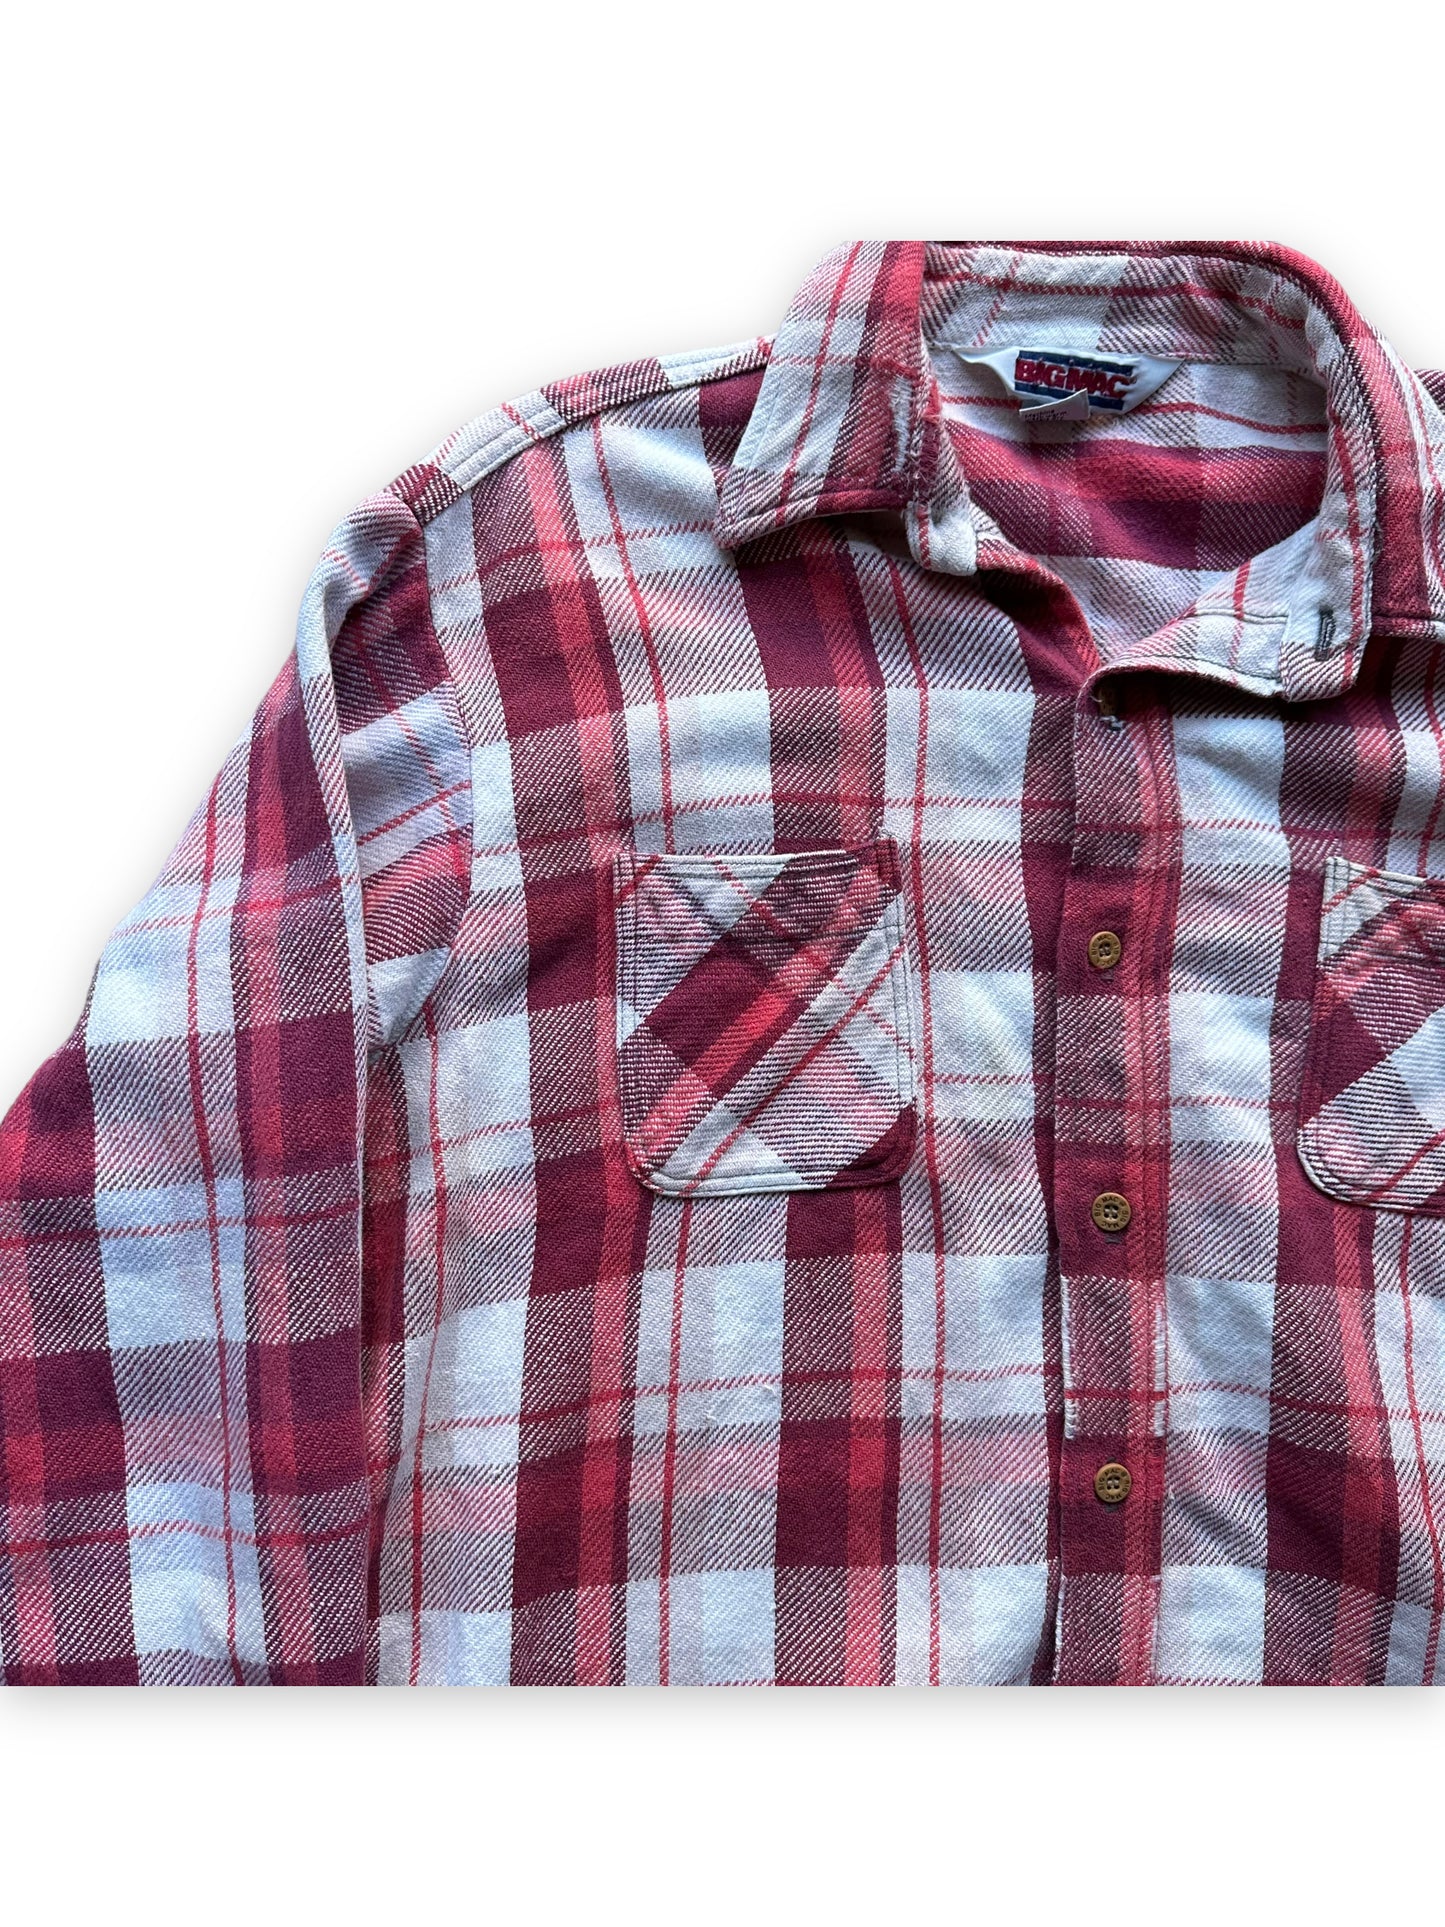 Upper Front Right View of Vintage Pink and Light Purple Big Mac Cotton Flannel SZ XL Tall | Barn Owl Vintage Seattle | Vintage Cotton Flannel Seattle